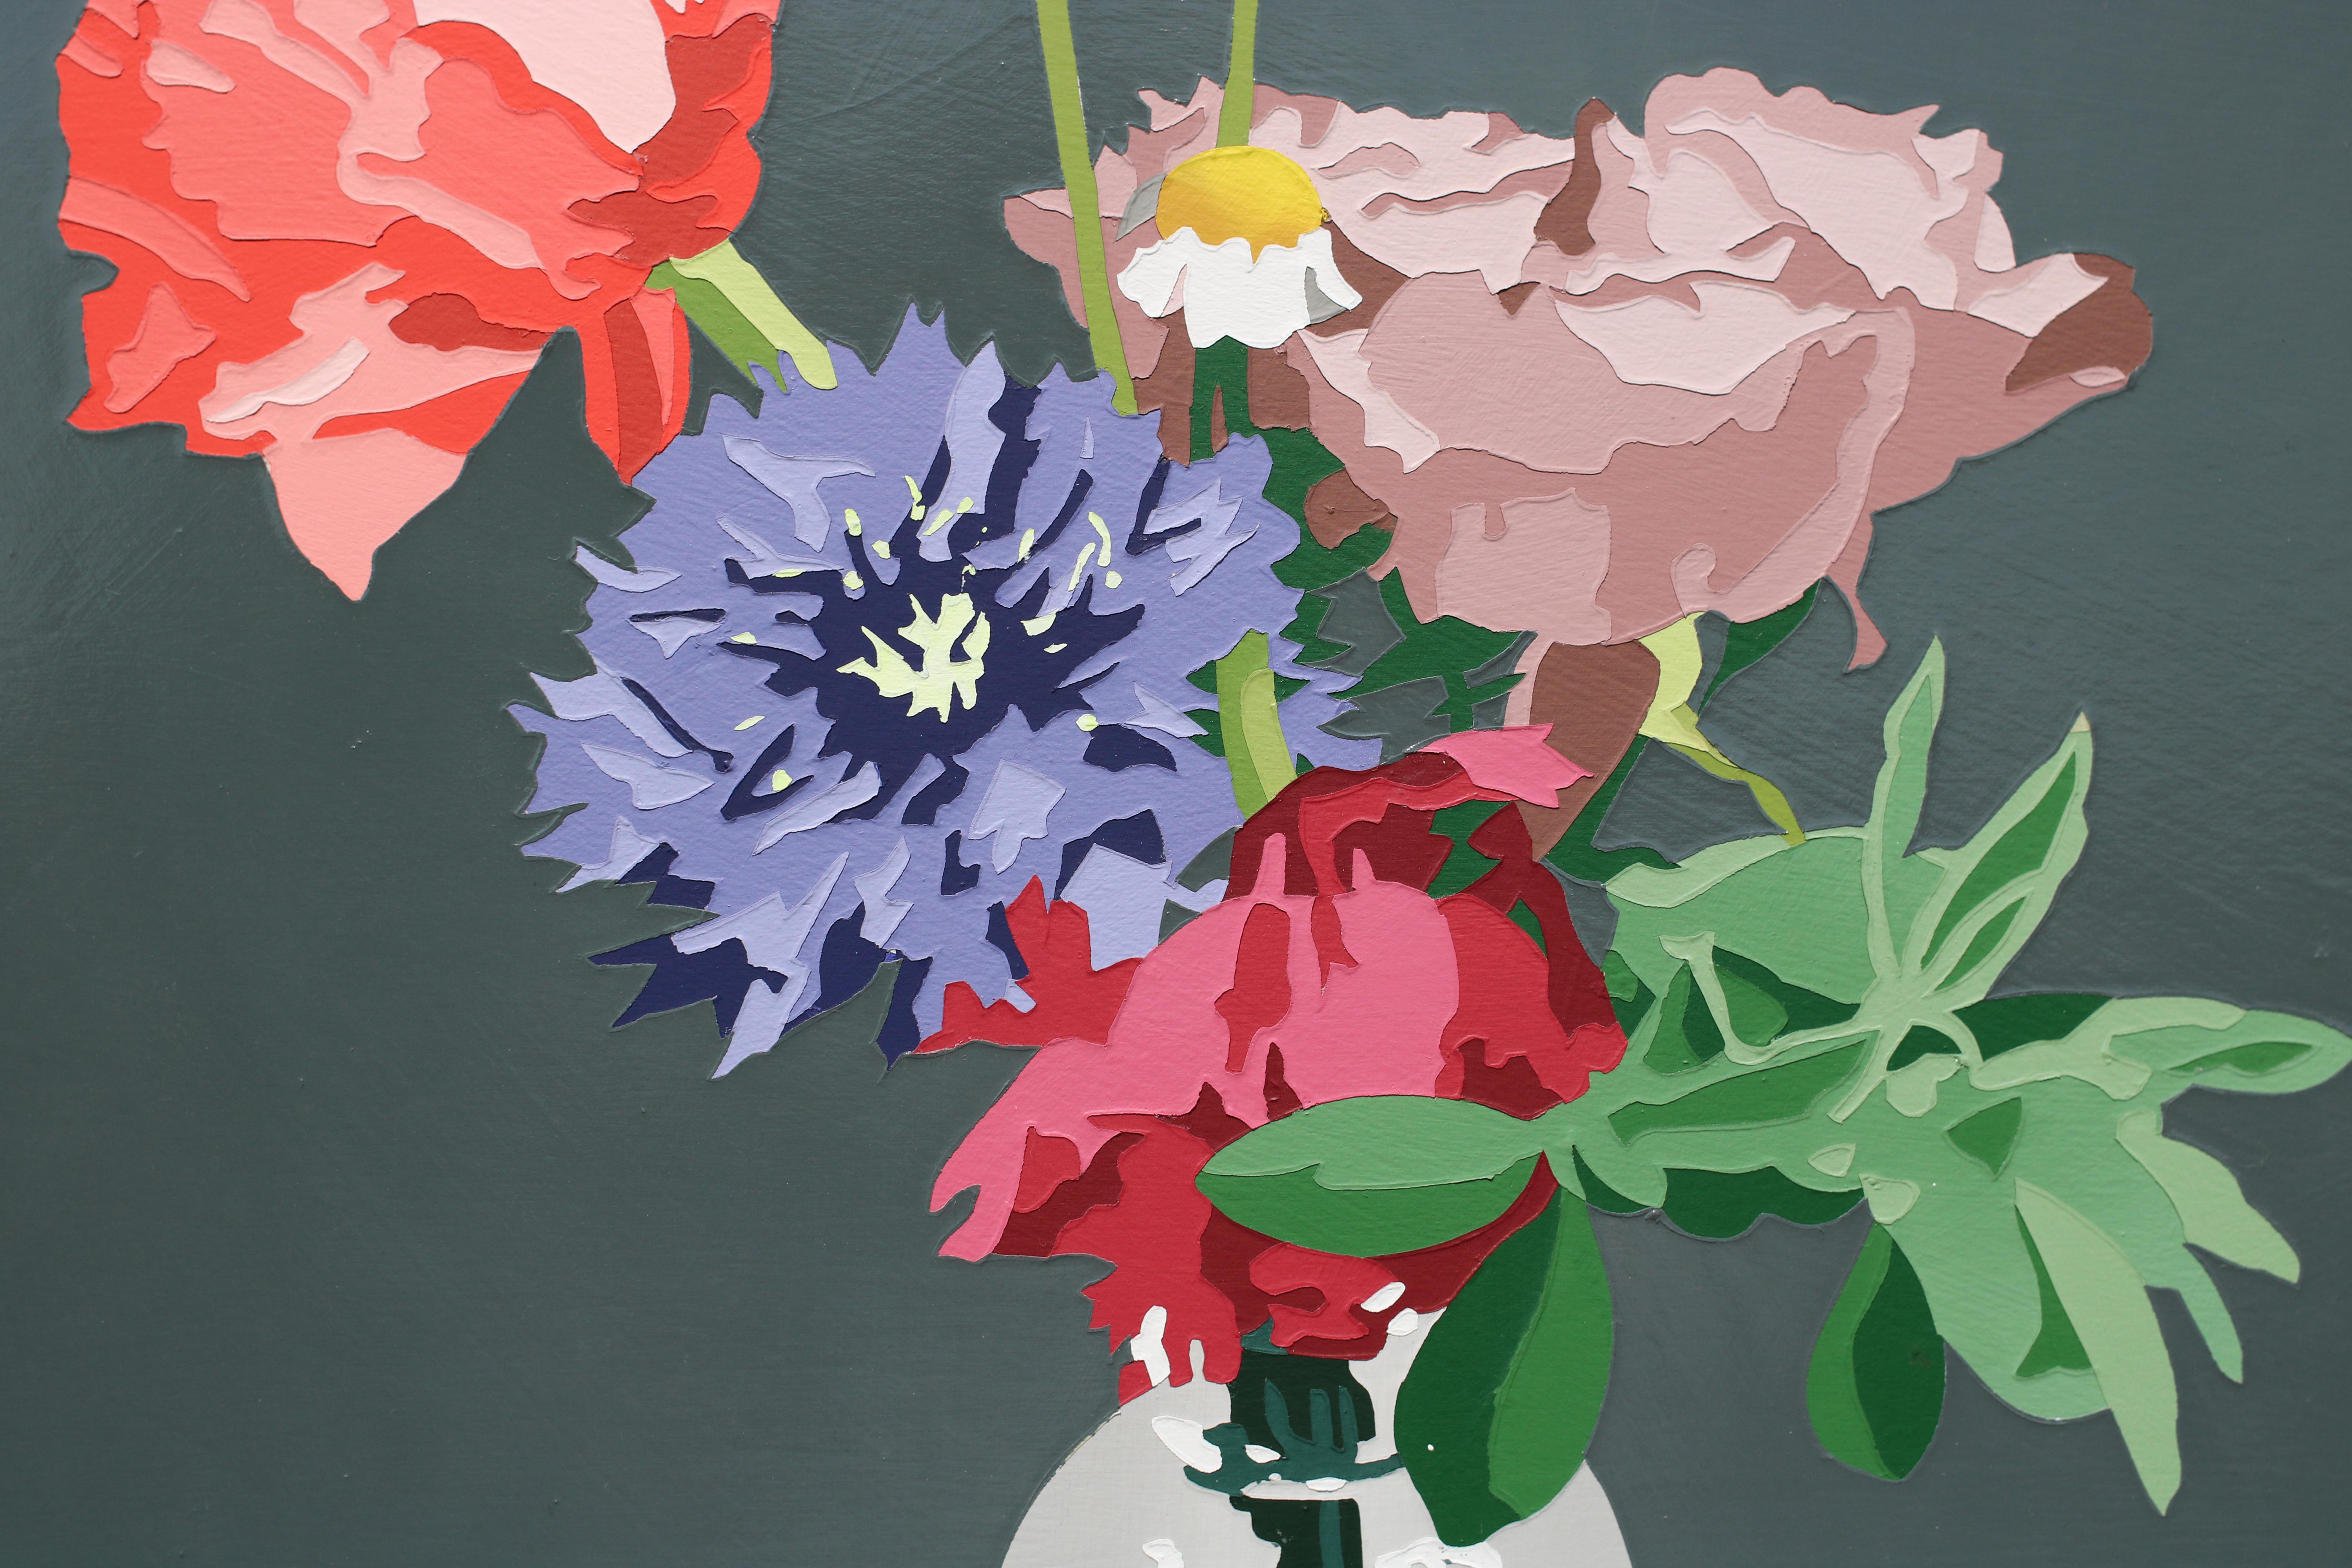 Wild Flowers, acrylic and pigmented varnish on panel, pop art bouquet painting - Painting by Lori Larusso 